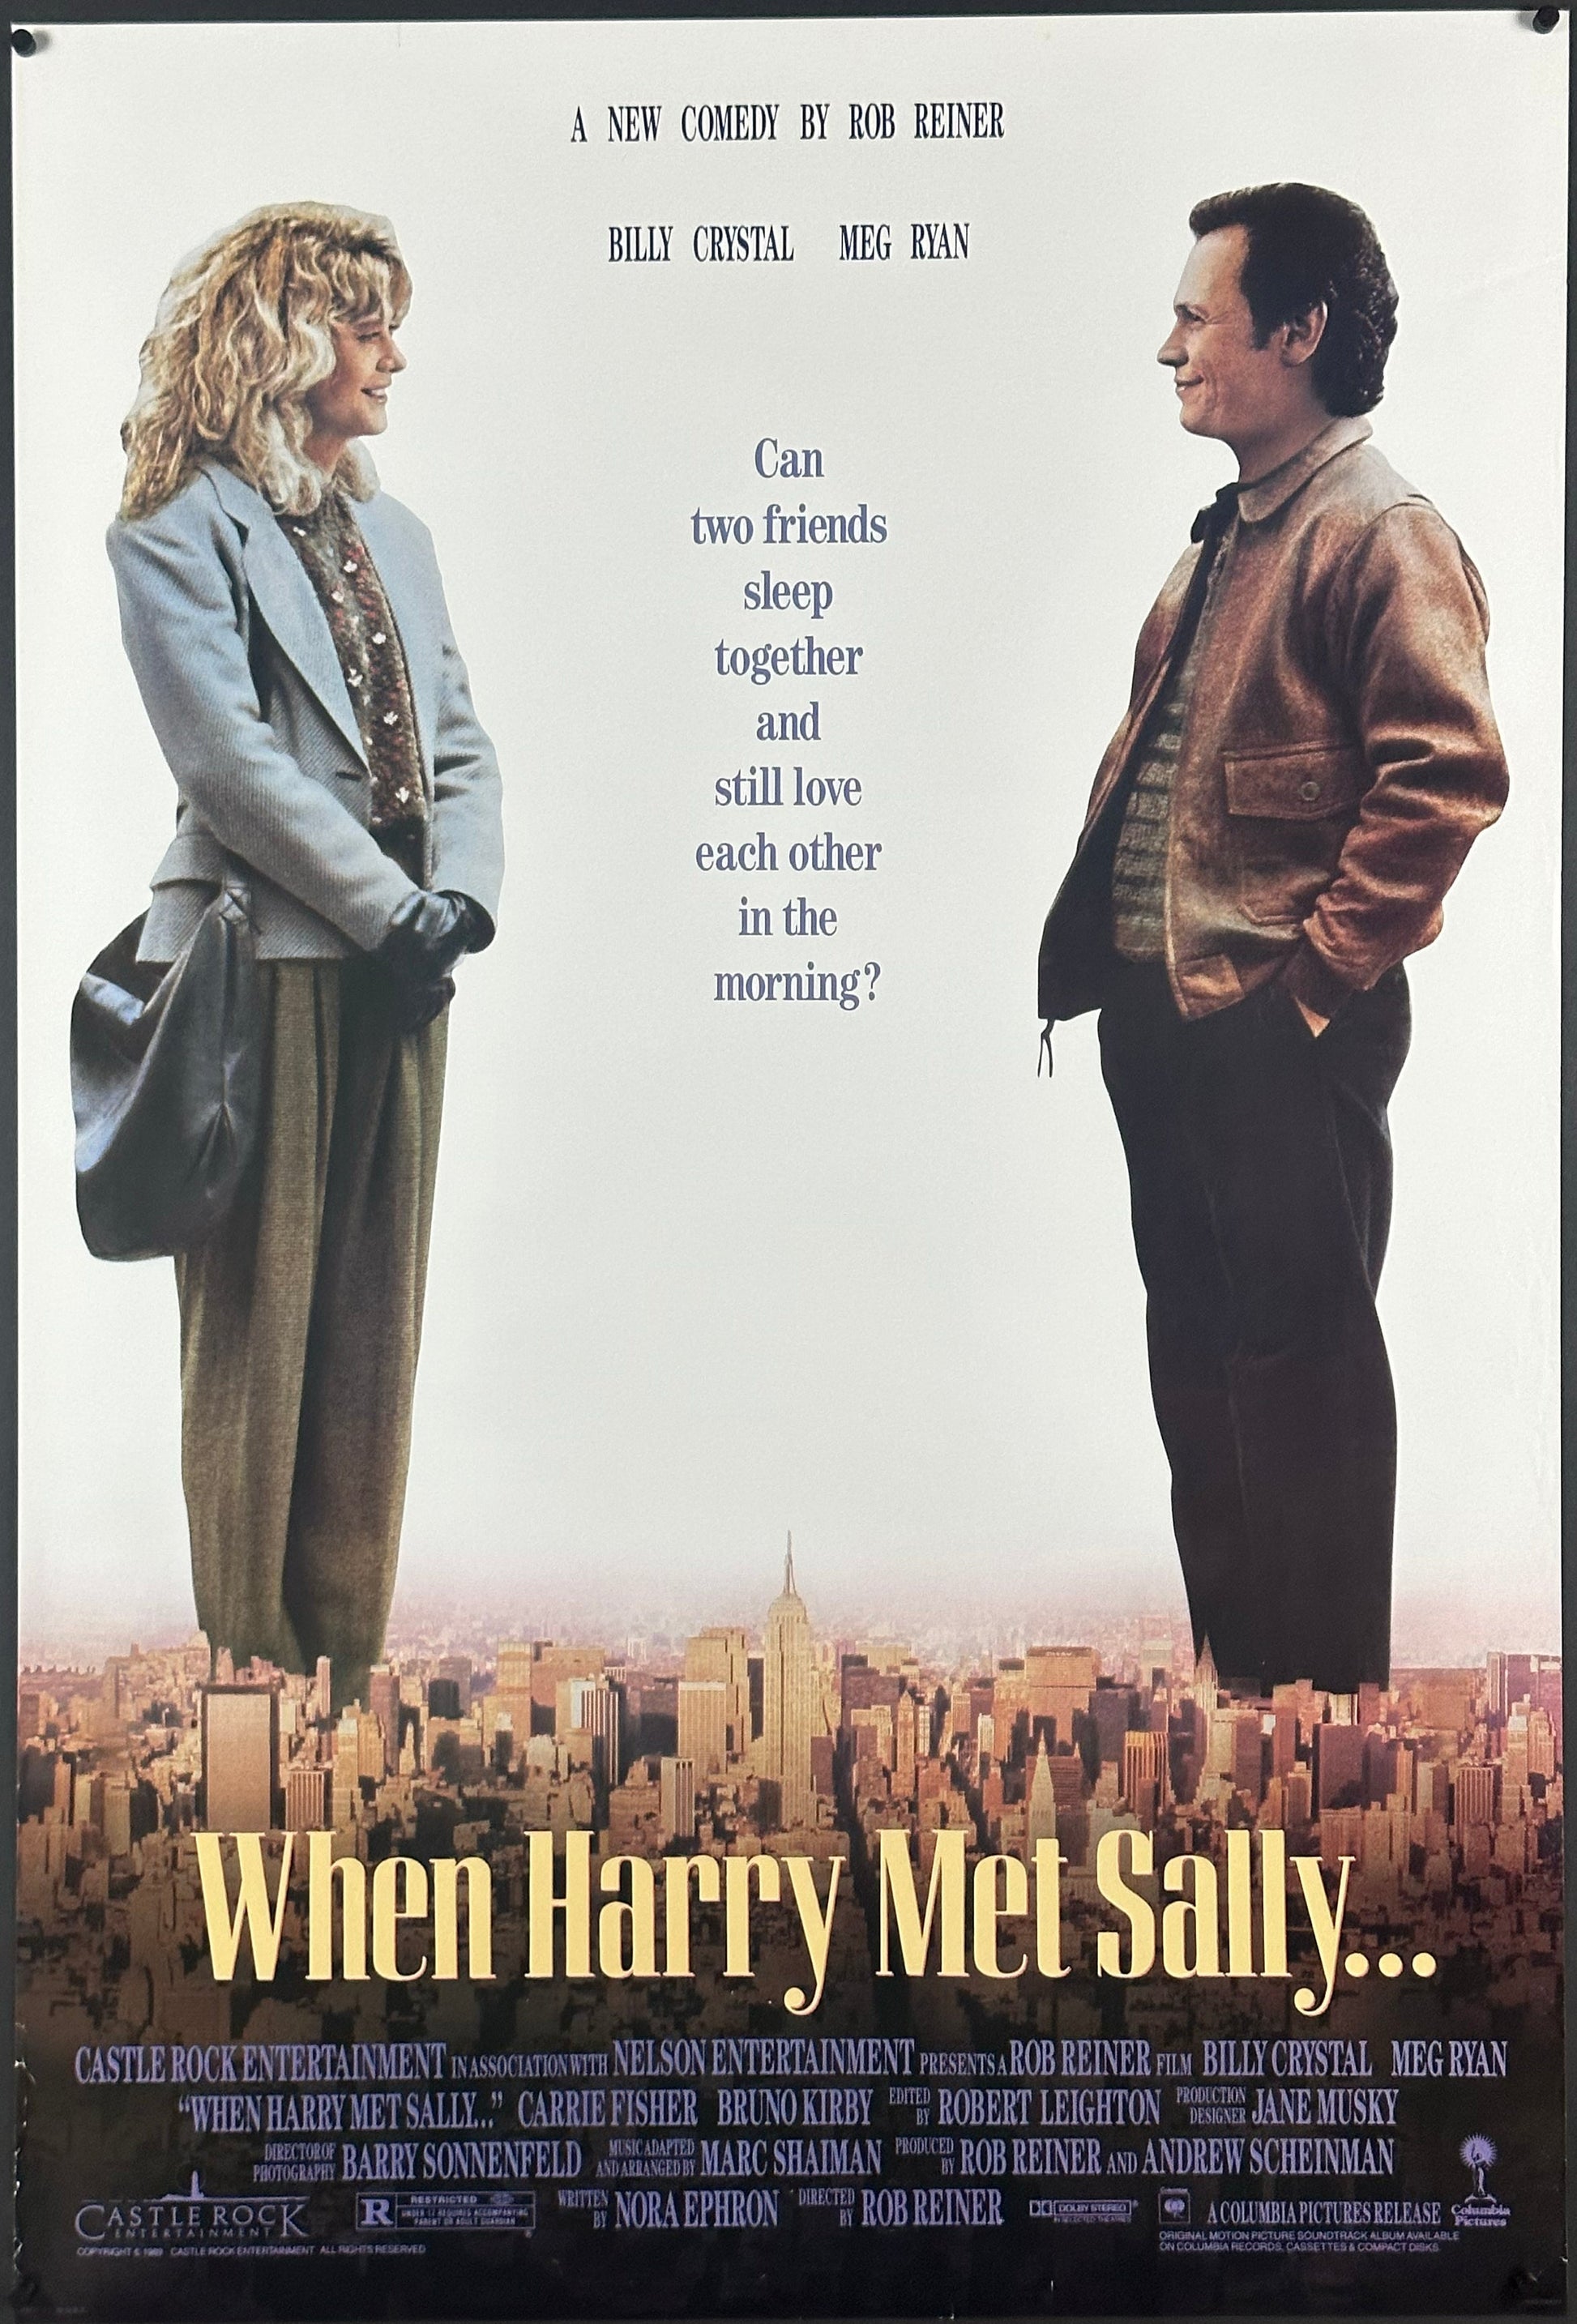 When Harry Met Sally... - posterpalace.com